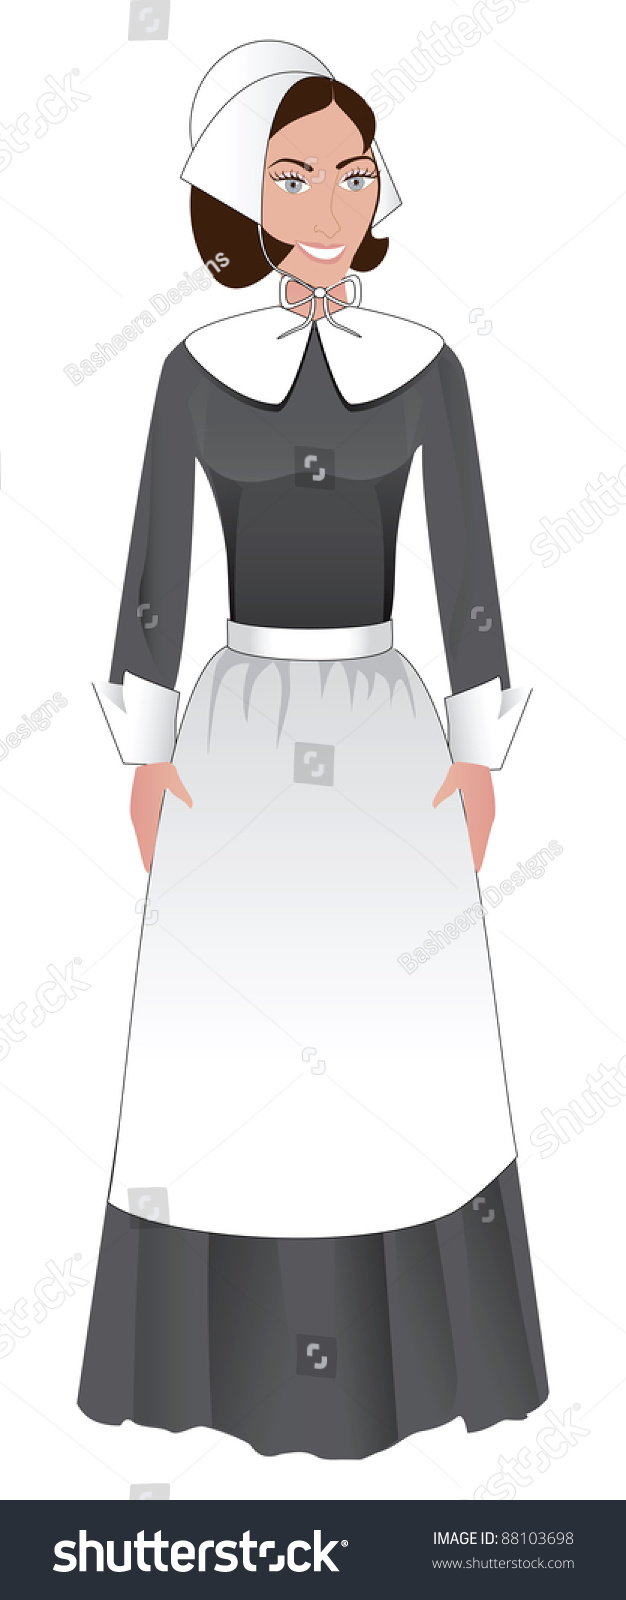 SVG of Vector Illustration for Thanksgiving of a Pilgrim Woman. svg